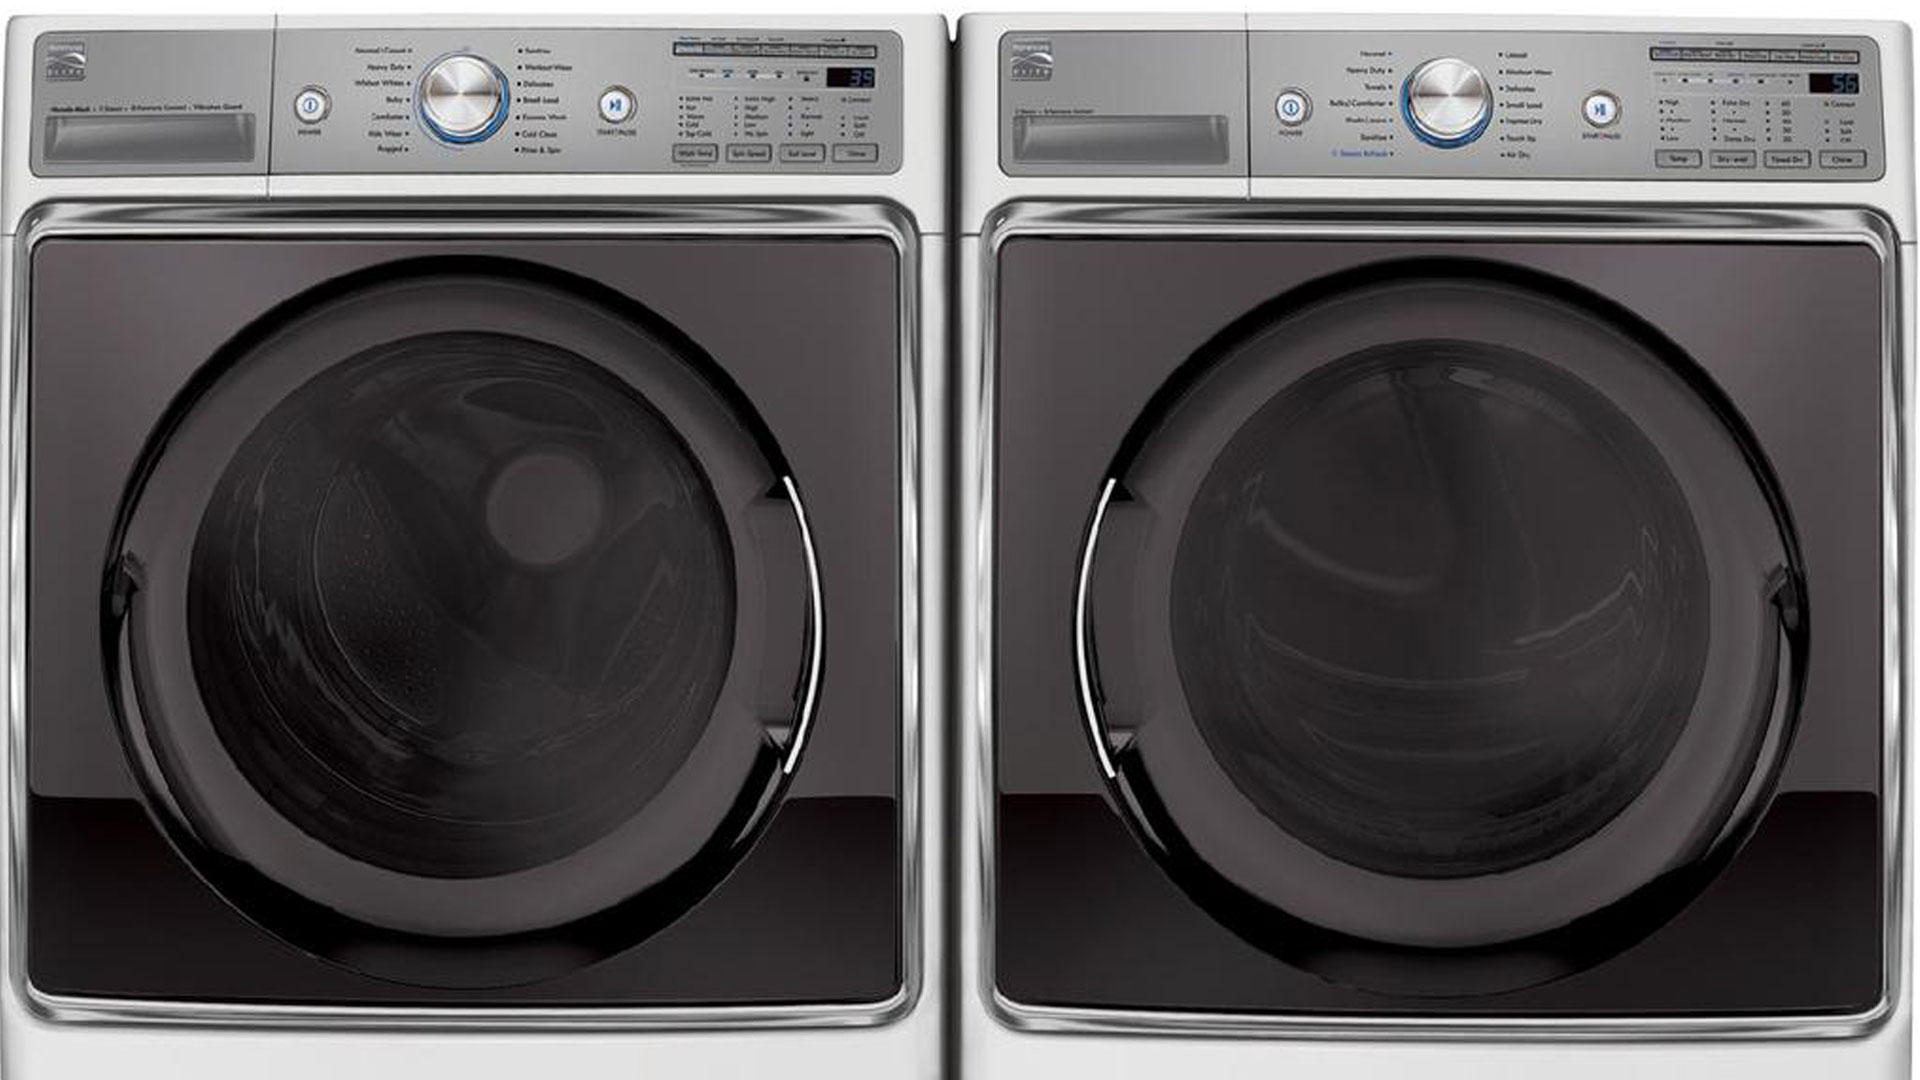 Kenmore Washers Appliance Repair Service | Kenmore Appliance